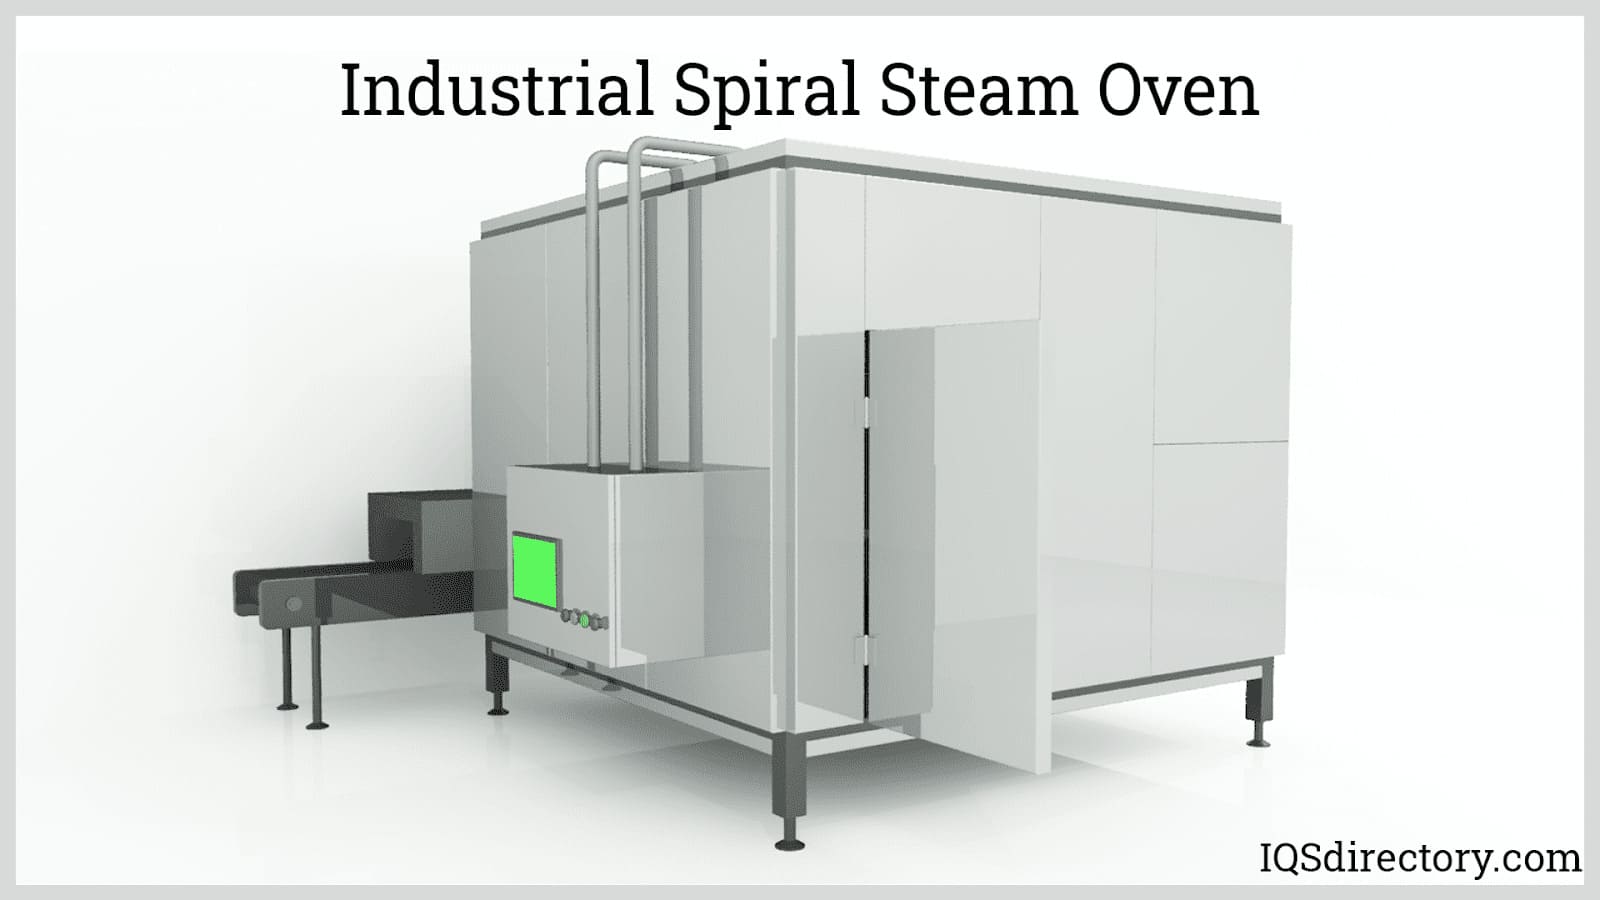 Insulate Industrial Ovens for Maximum Energy Savings